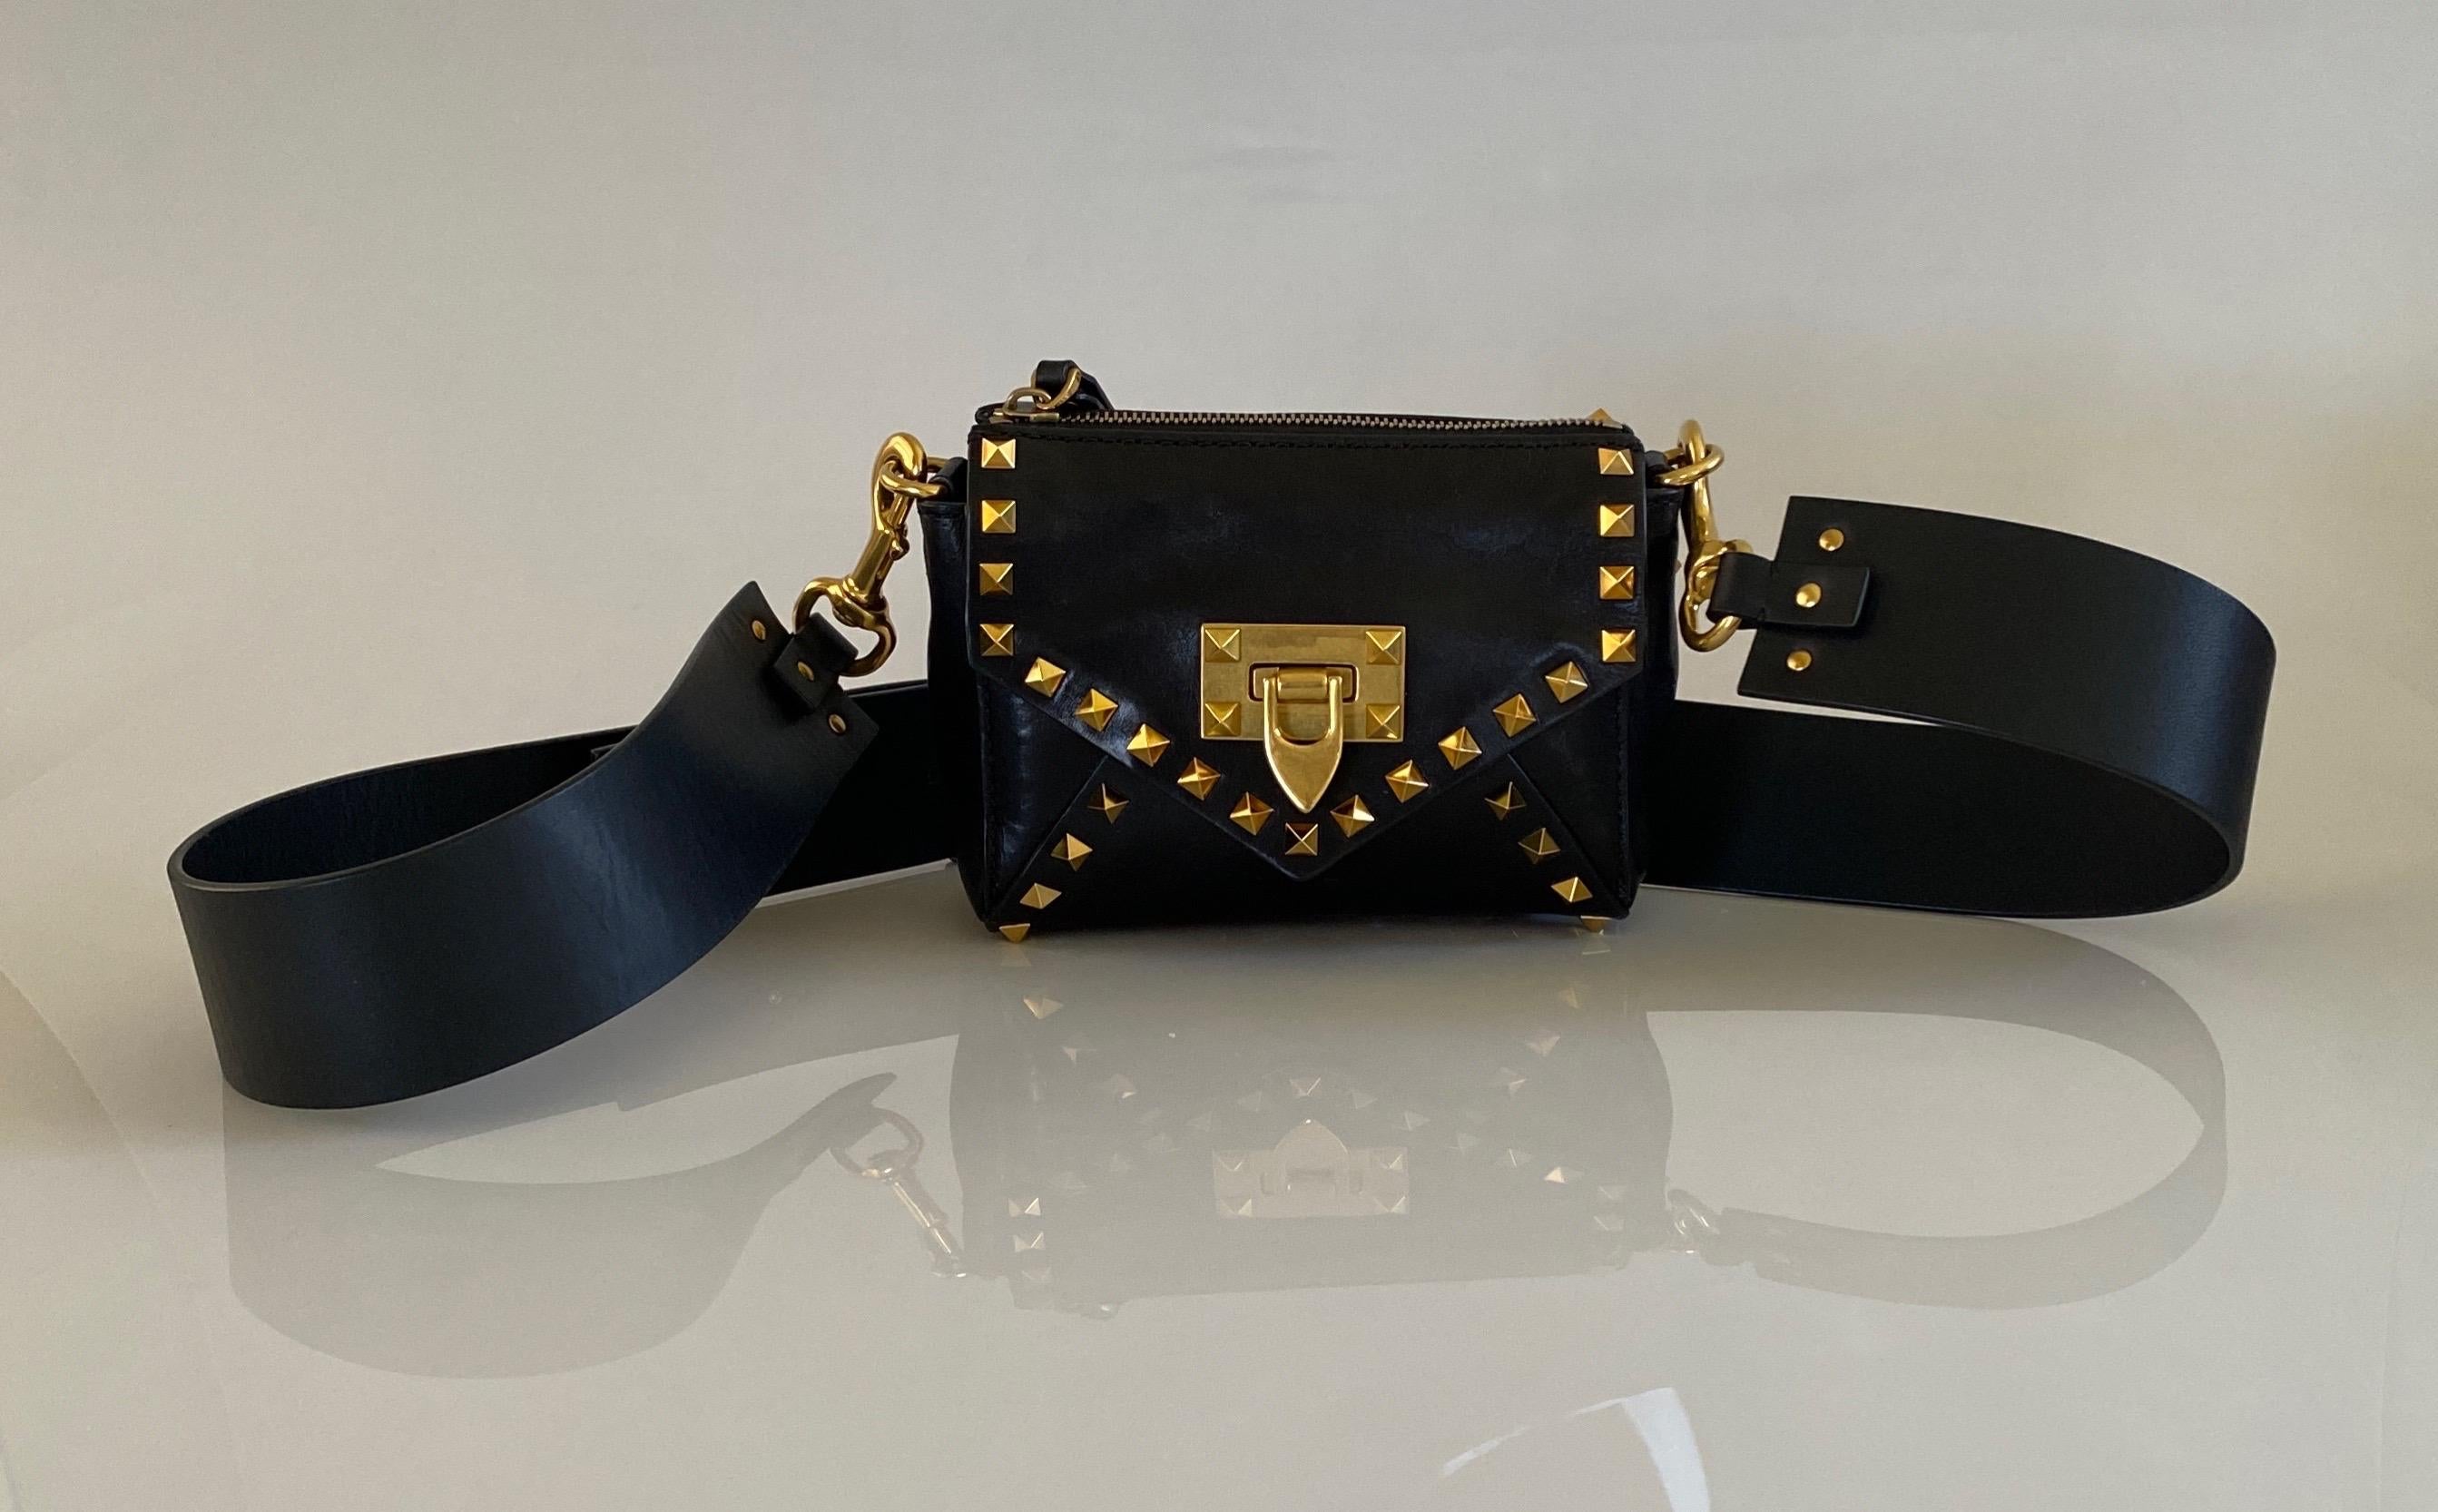 Valentino Black Small Rock Stud Caf Leather Crossbody Bag with Wide Strap - This Valentino crossbody is a perfect size for a night out or for the city/travel. Large Phone fits perfectly inside. The bag is made of a beautiful Calf leather with a